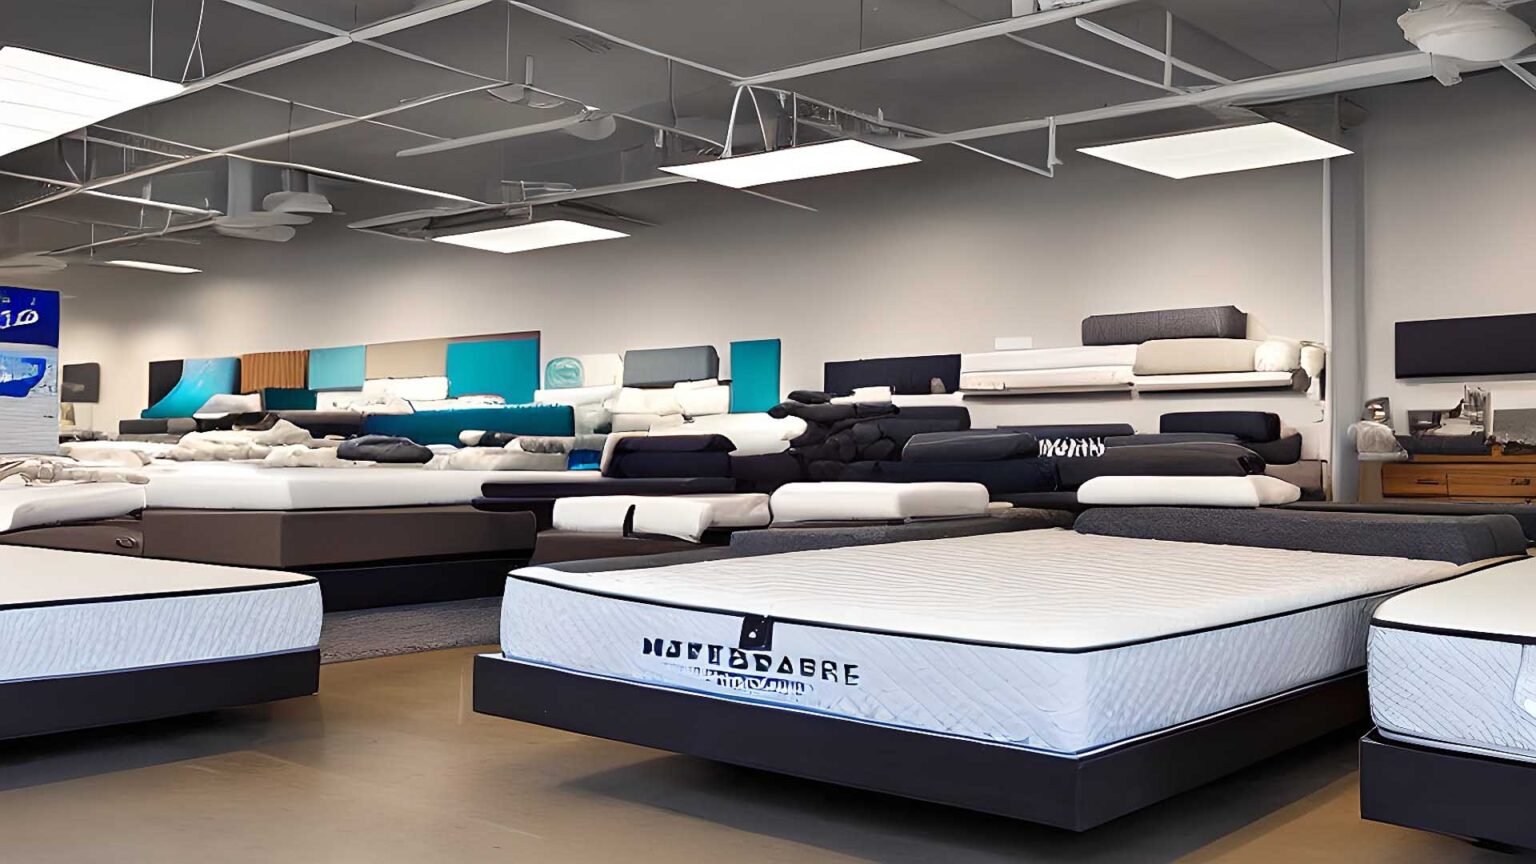 Mattress Stores, mattress dealers, and mattress retailers near me in Newhall, CA